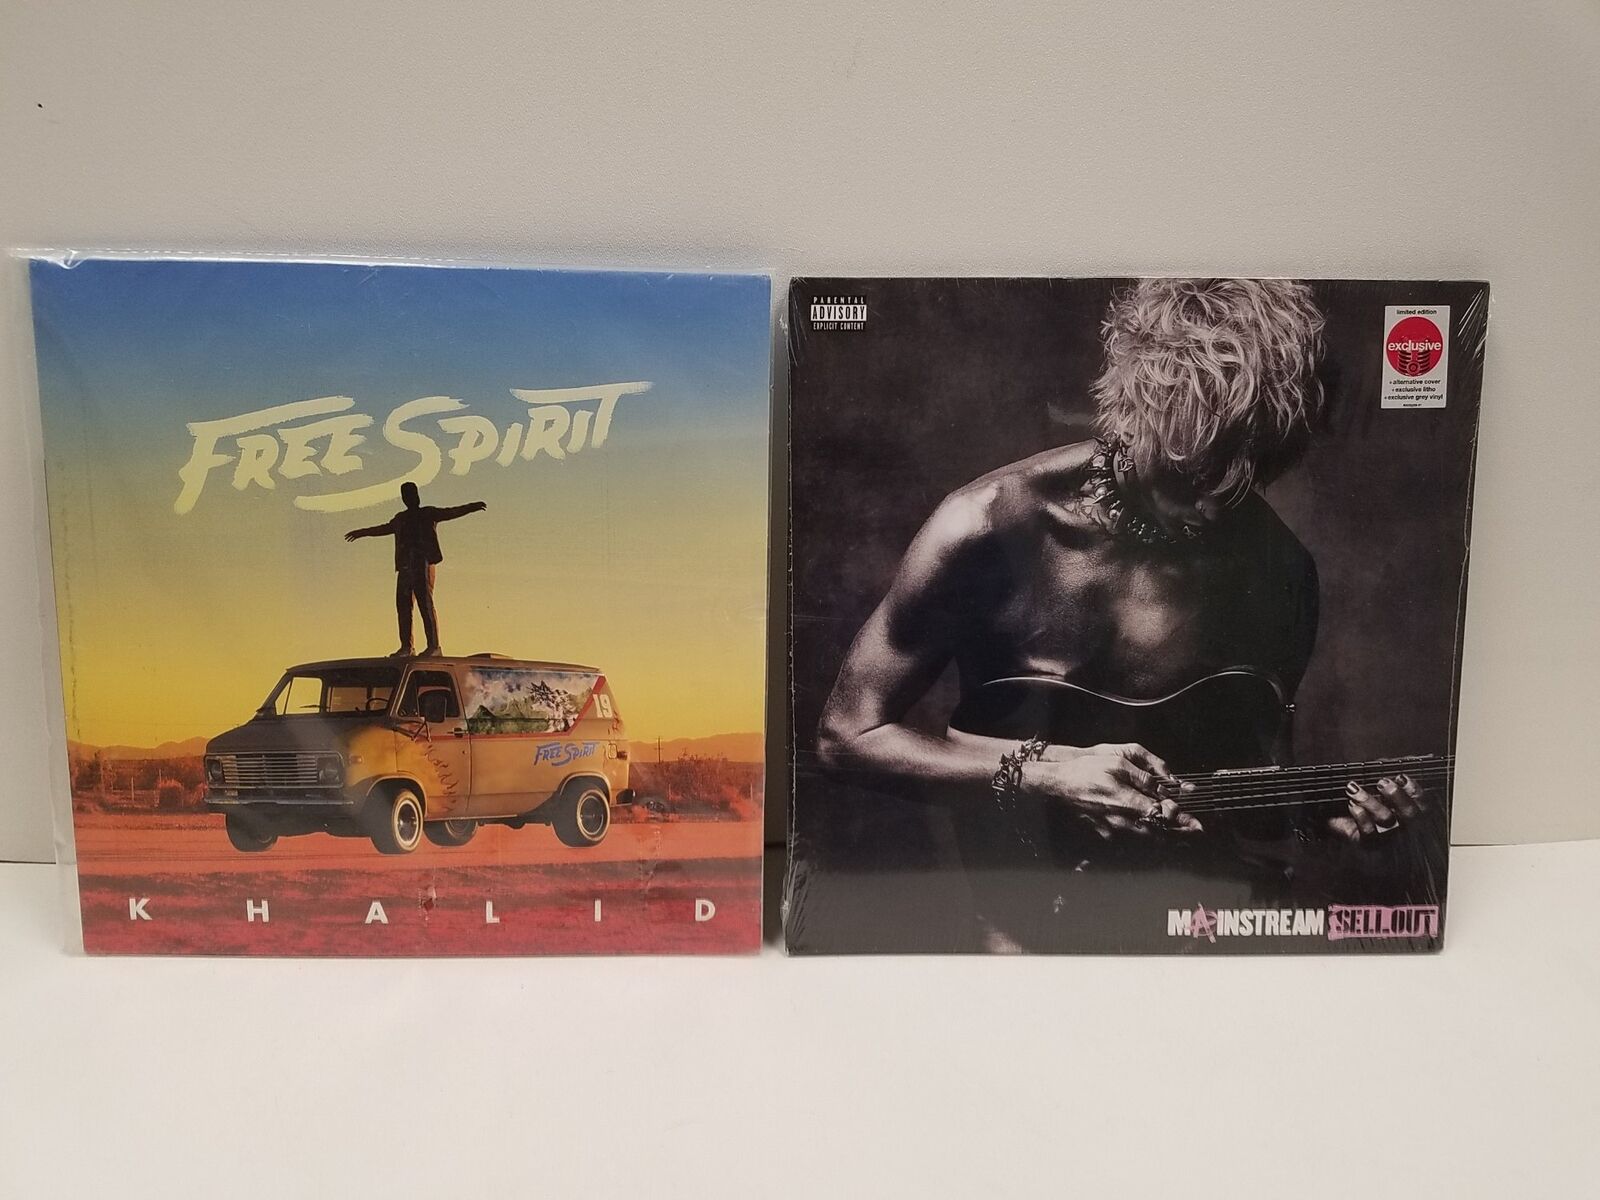 Khalid Free Spirit & Mainstream Sellout (From France) Vinyl LP Records